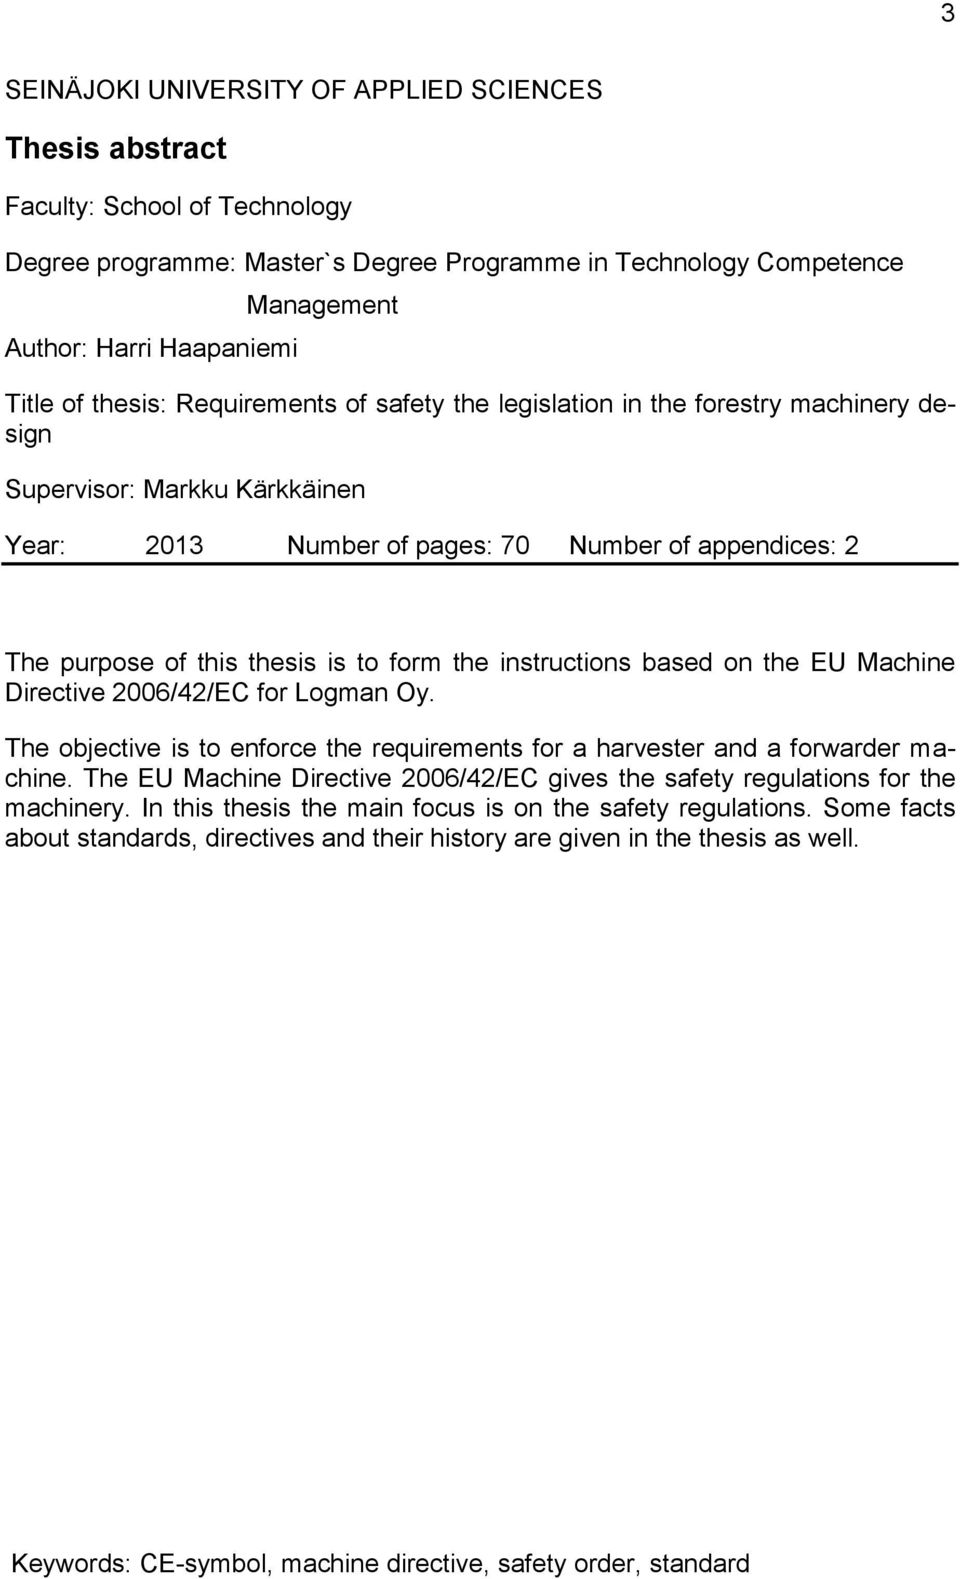 to form the instructions based on the EU Machine Directive 2006/42/EC for Logman Oy. The objective is to enforce the requirements for a harvester and a forwarder machine.